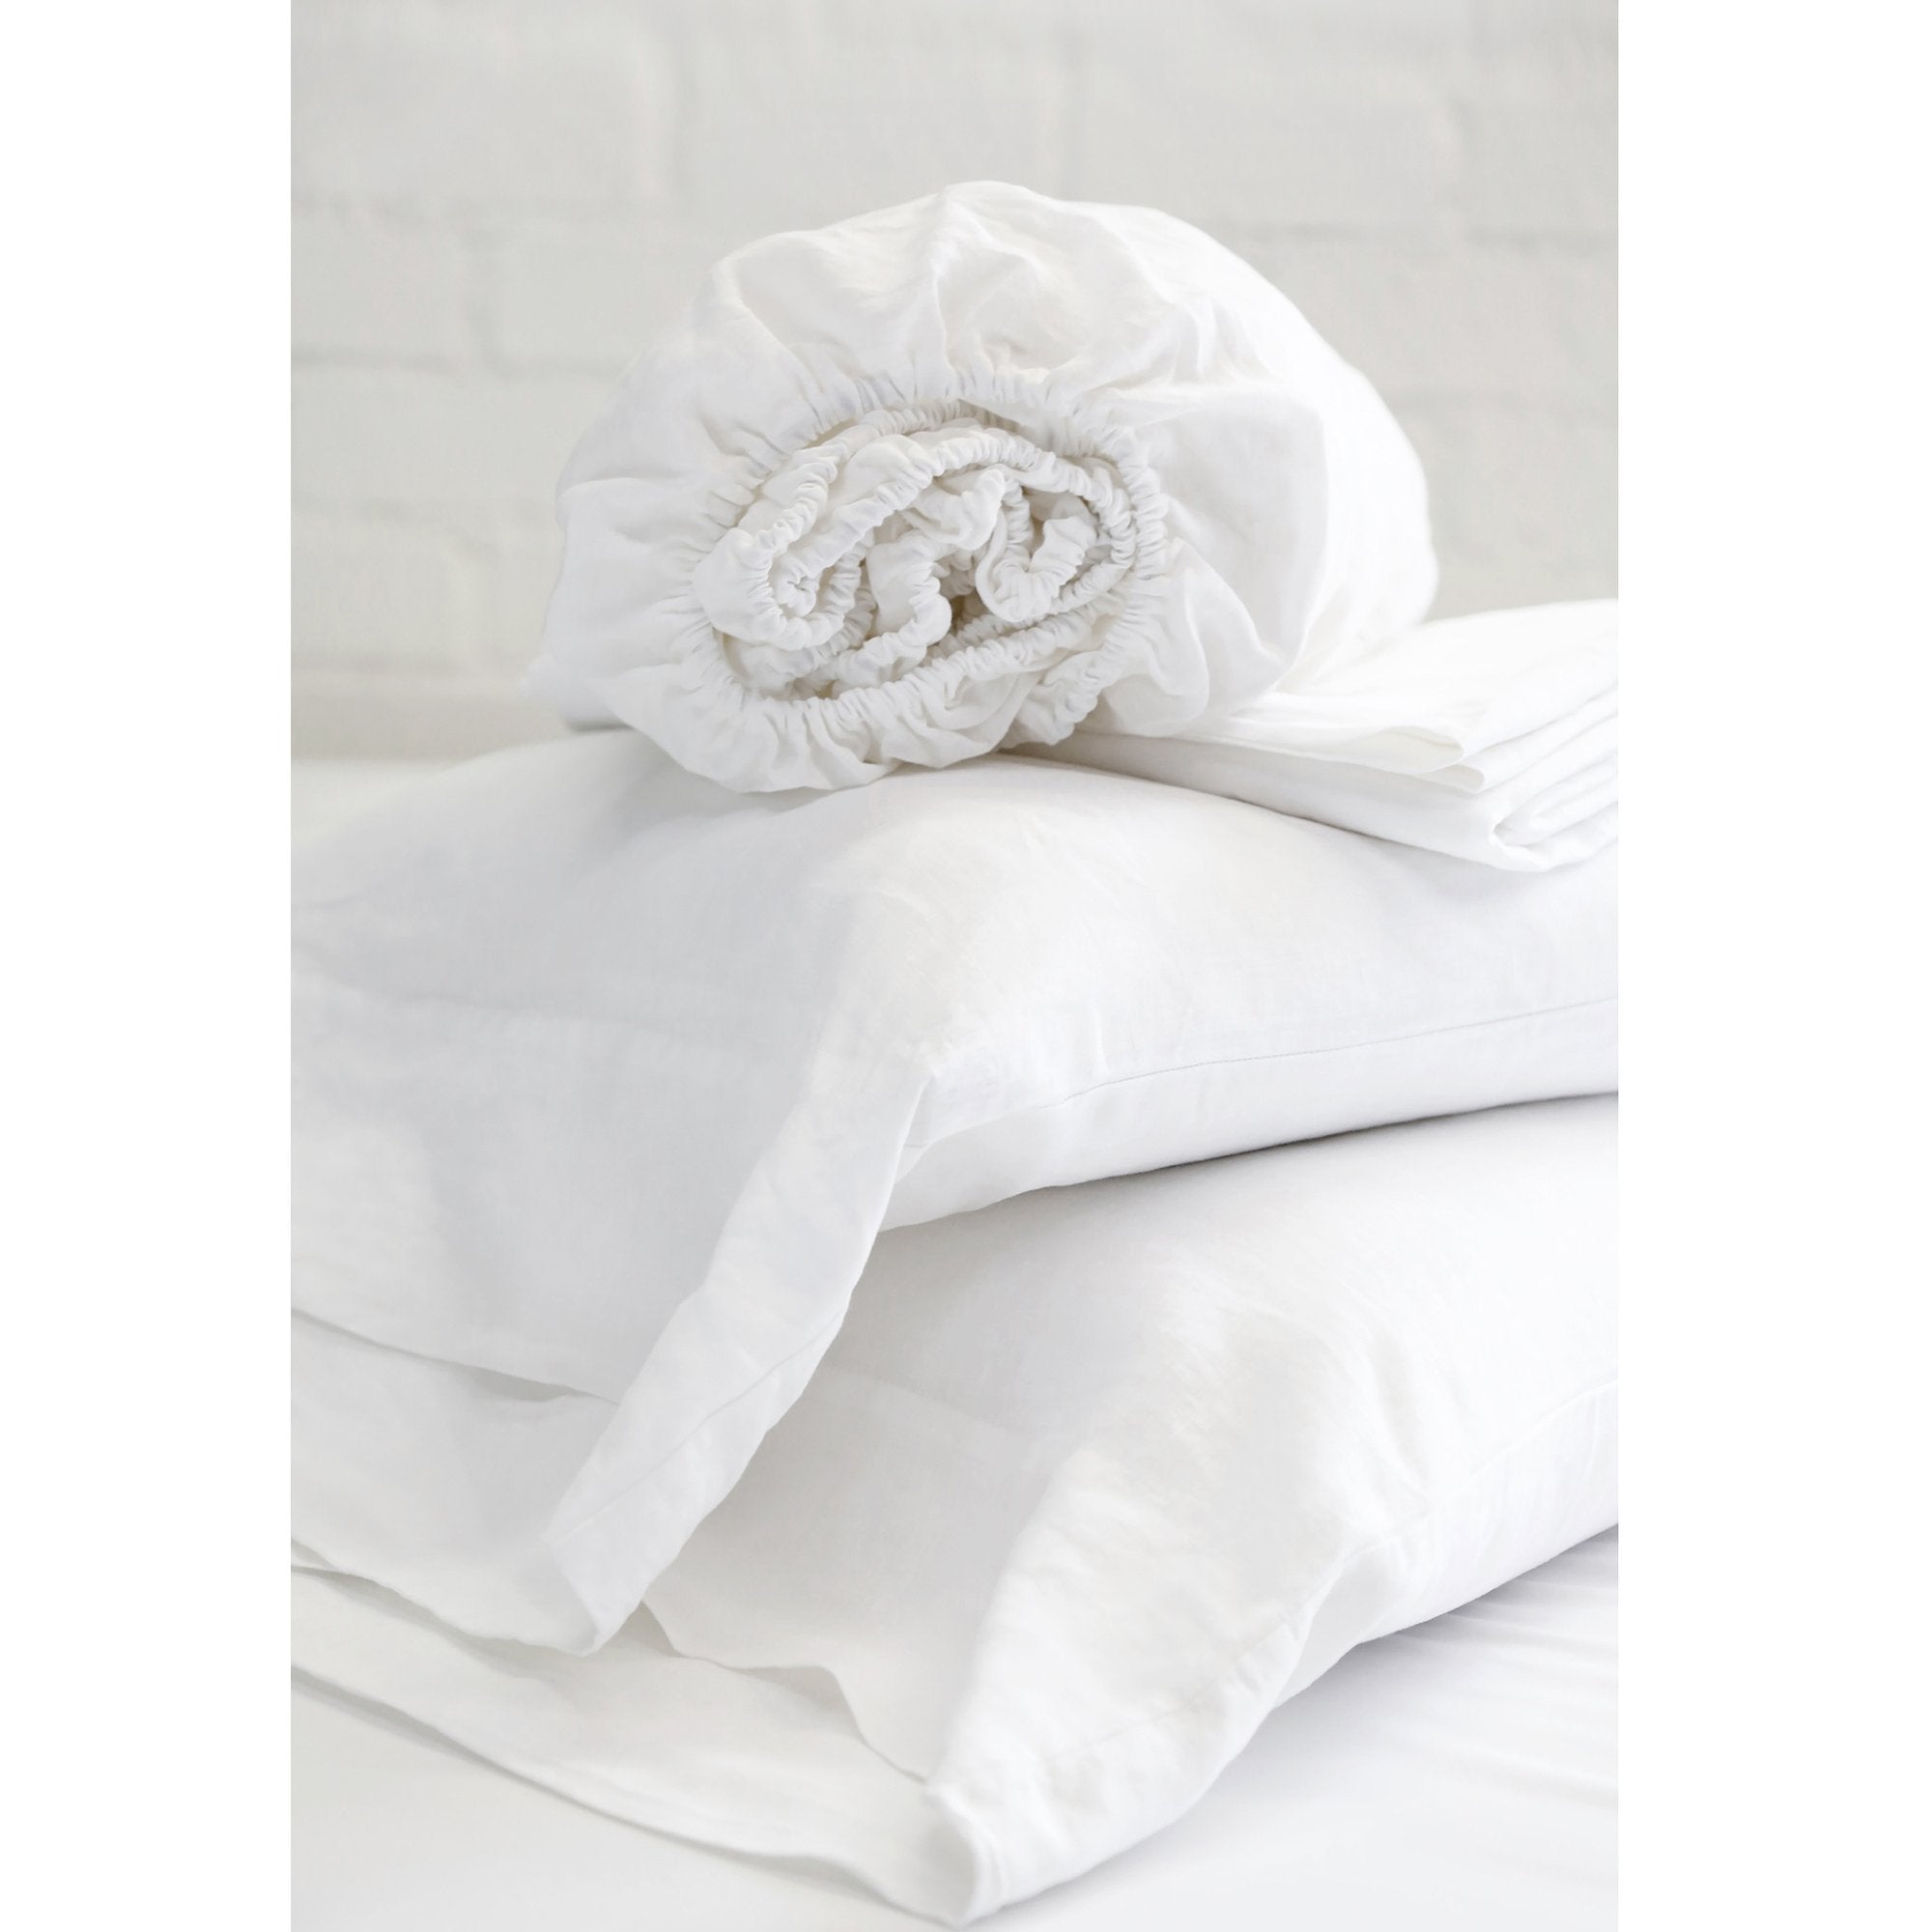 Pom Pom at Home - White Linen Sheets and pilowcases | Fig Linens and Home